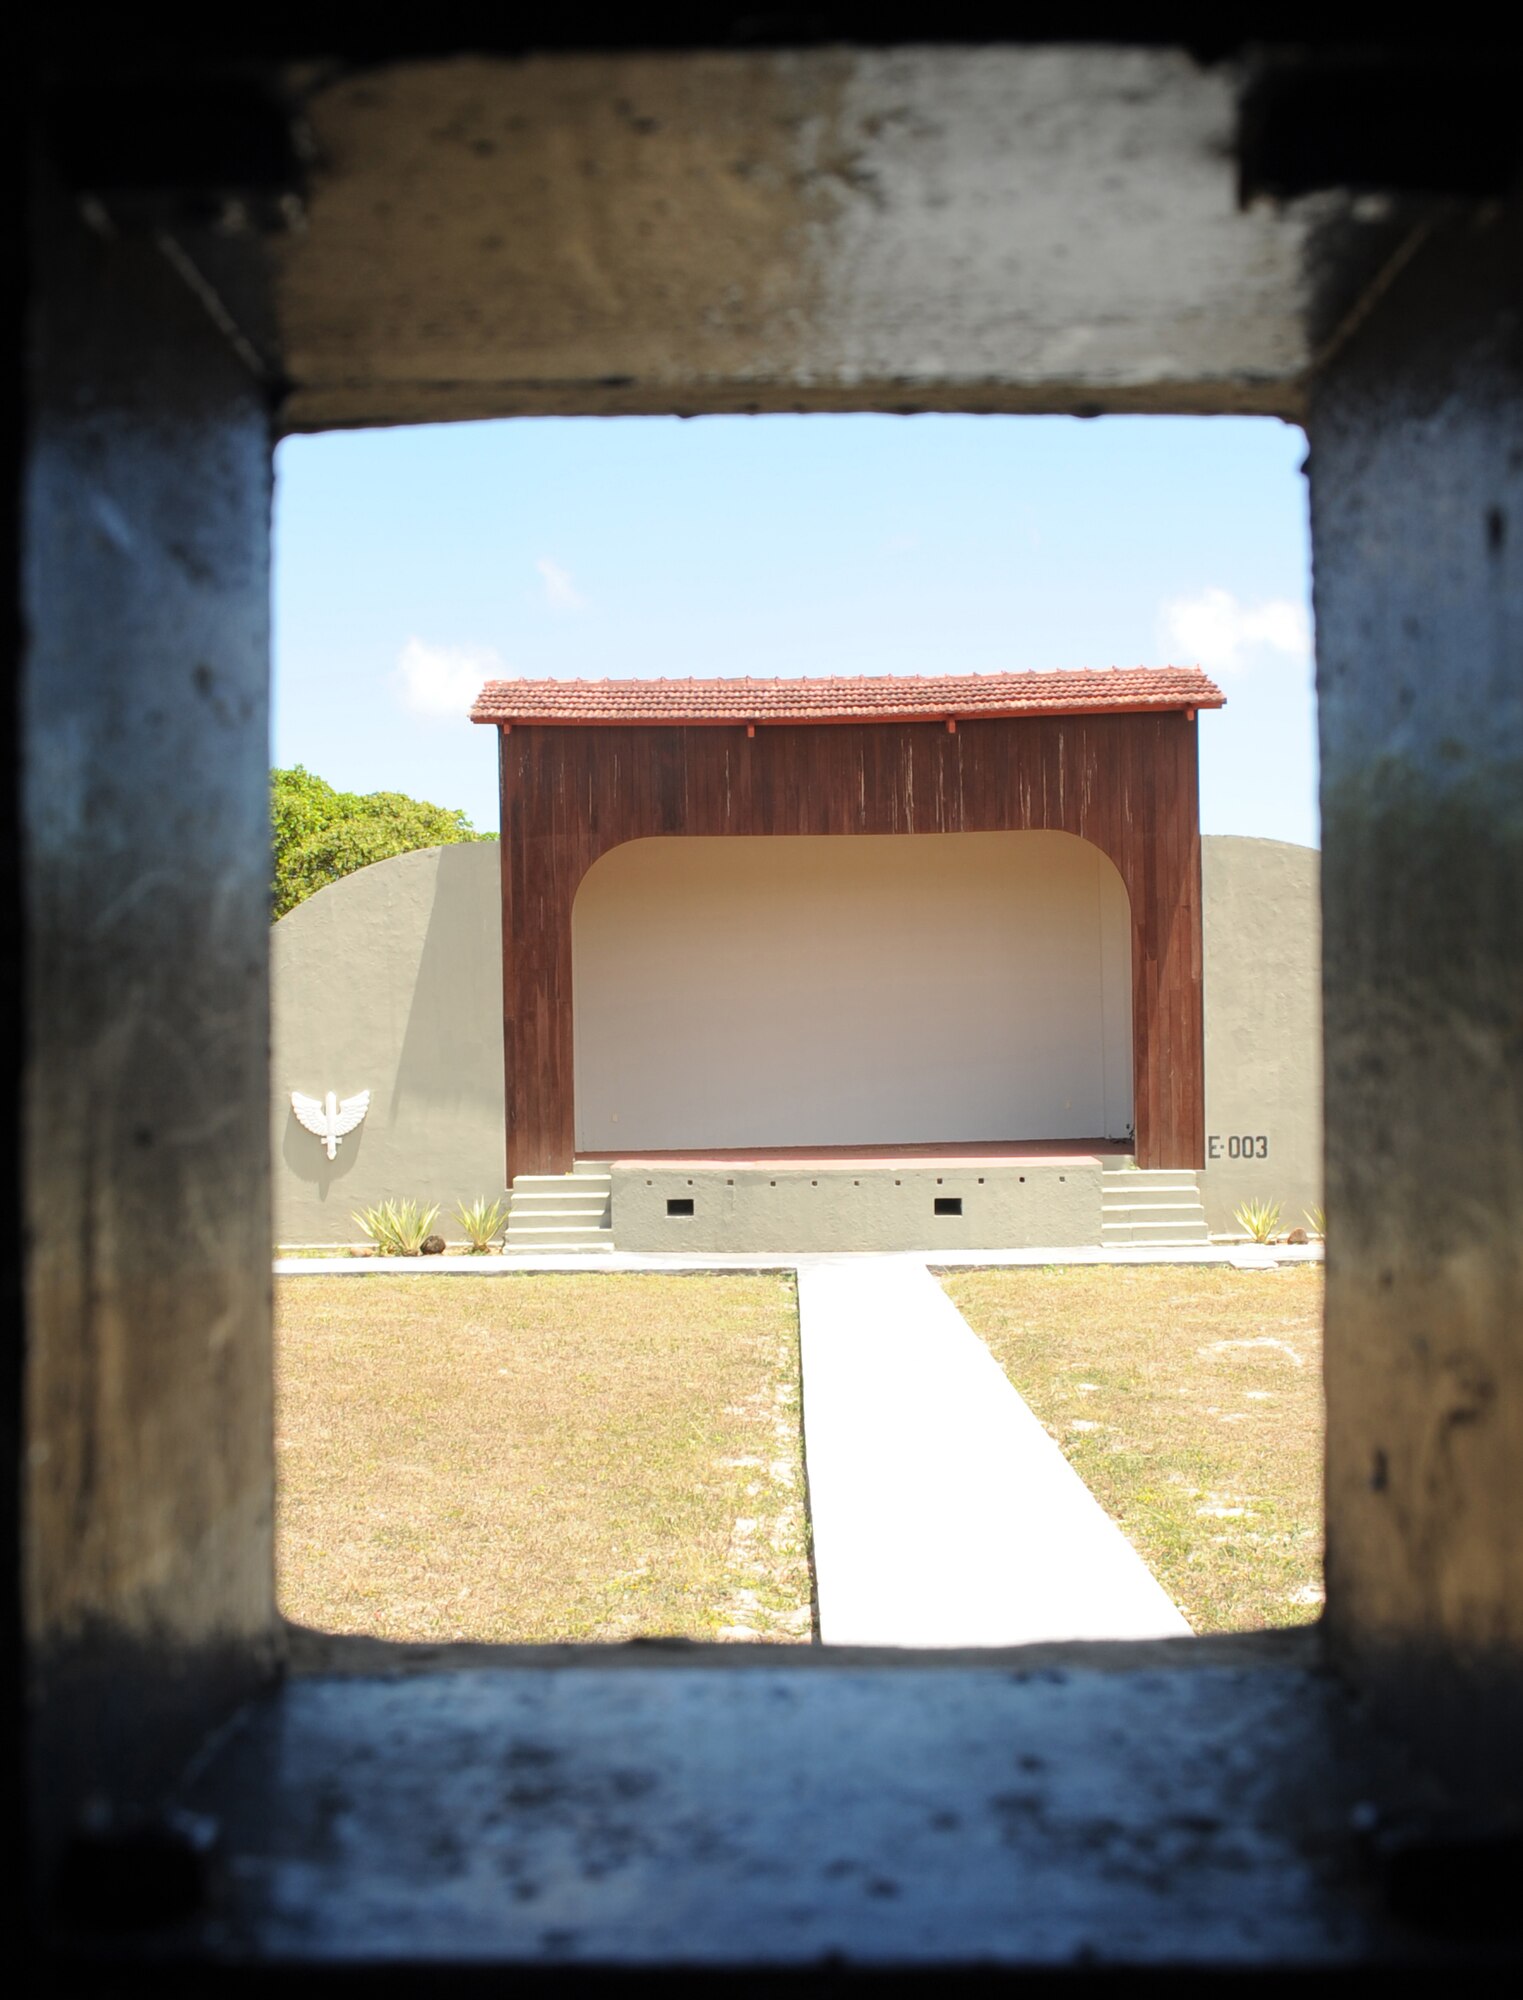 Looking out from the recently restored outdoor projection room at Natal Air Base, Brazil is the base’s outdoor theater. The theater was used to showcase USO tours and to show movies to troops stationed and transiting through Natal Air Base during World War II. The base was nicknamed "Trampoline to Victory" during World War II because it was used as a “jumping off” point for U.S. aircraft before entering African and European theaters. The base is located on the eastern most point of South America. American servicemembers are once again stationed on the base as they participate in CRUZEX V. CRUZEX V, or Cruzeiro Do Sul (Southern Cross), is a multi-national combined exercise involving the Air Forces of Argentina, Brazil, Chile, France and Uruguay, and observers from numerous other countries with more than 82 aircraft and almost 3,000 Airmen involved. (U.S. Air Force photo/Staff Sgt. Michael Matkin)